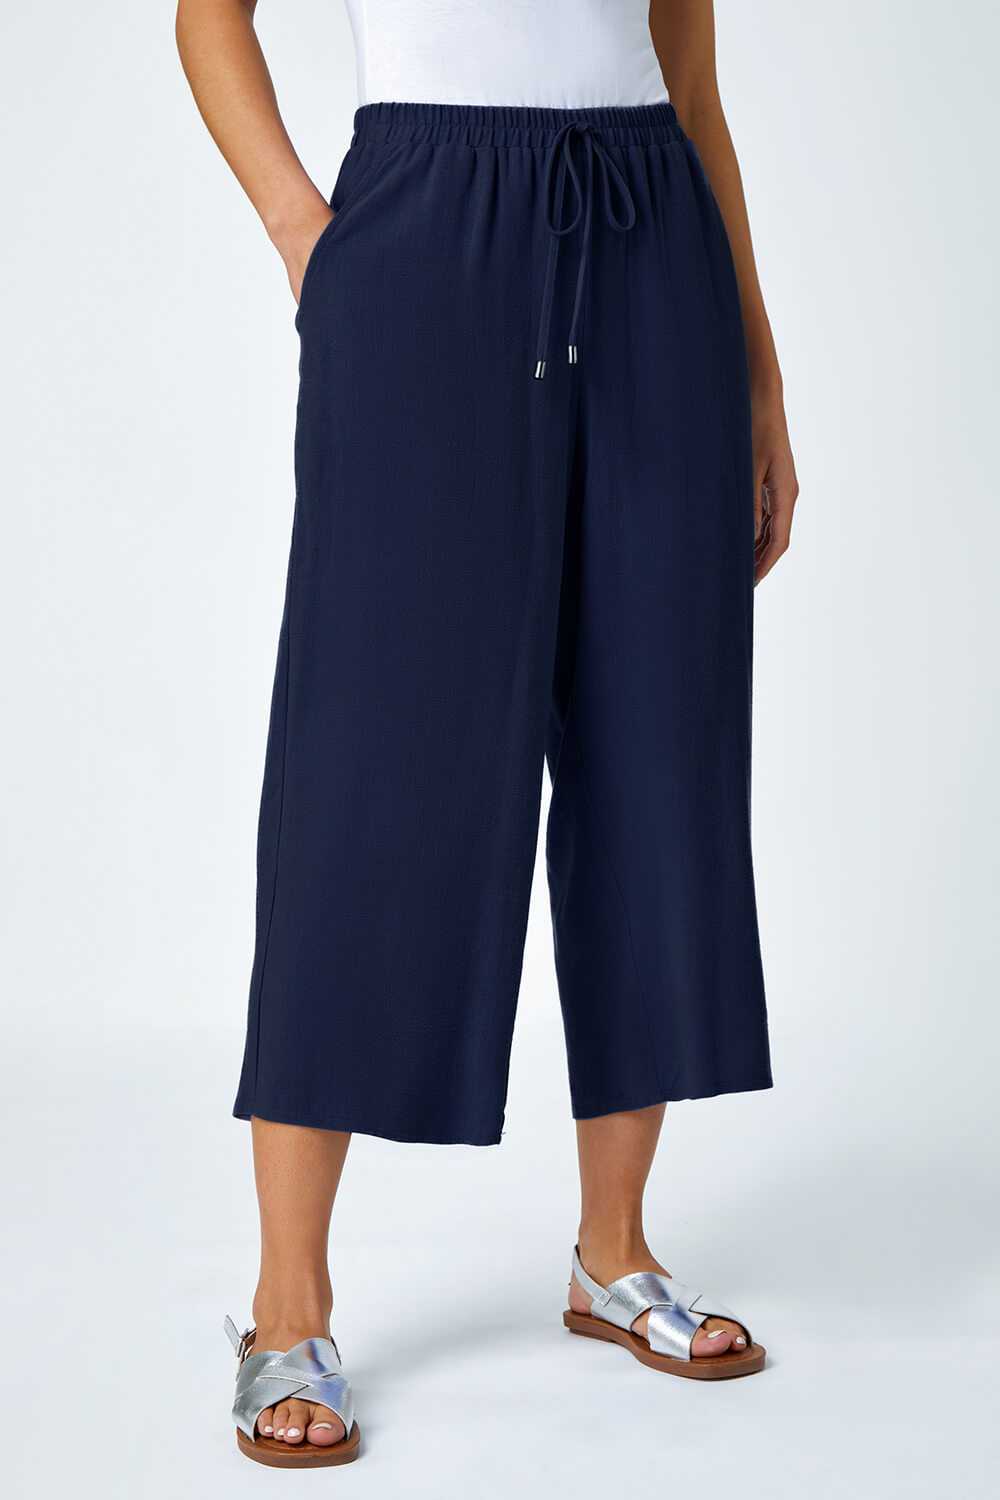 Navy  Petite Linen Mix Wide Cropped Trousers, Image 4 of 5